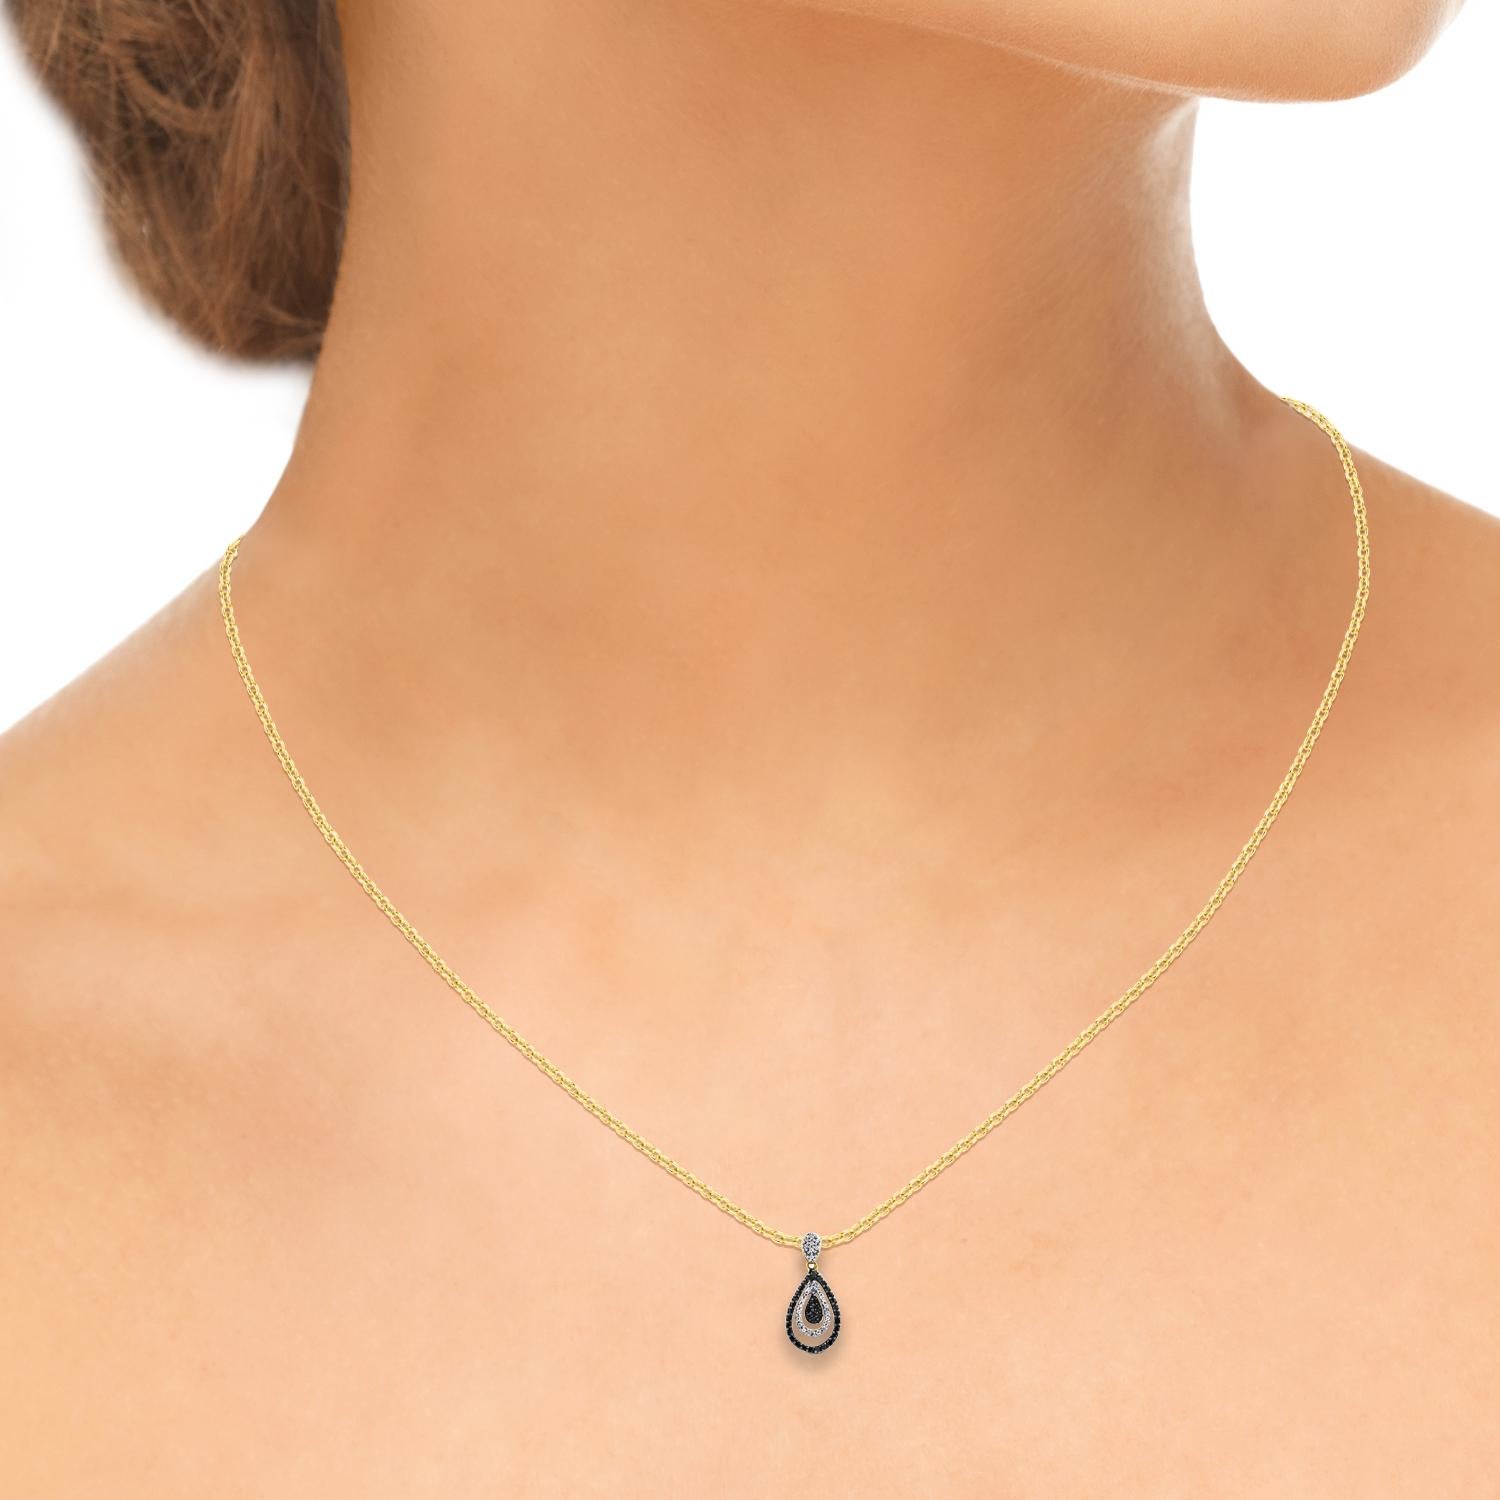 TJD 0.25 Carat White & Black Treated Diamond 14KT Gold Teardrop Pendant Necklace In New Condition For Sale In New York, NY